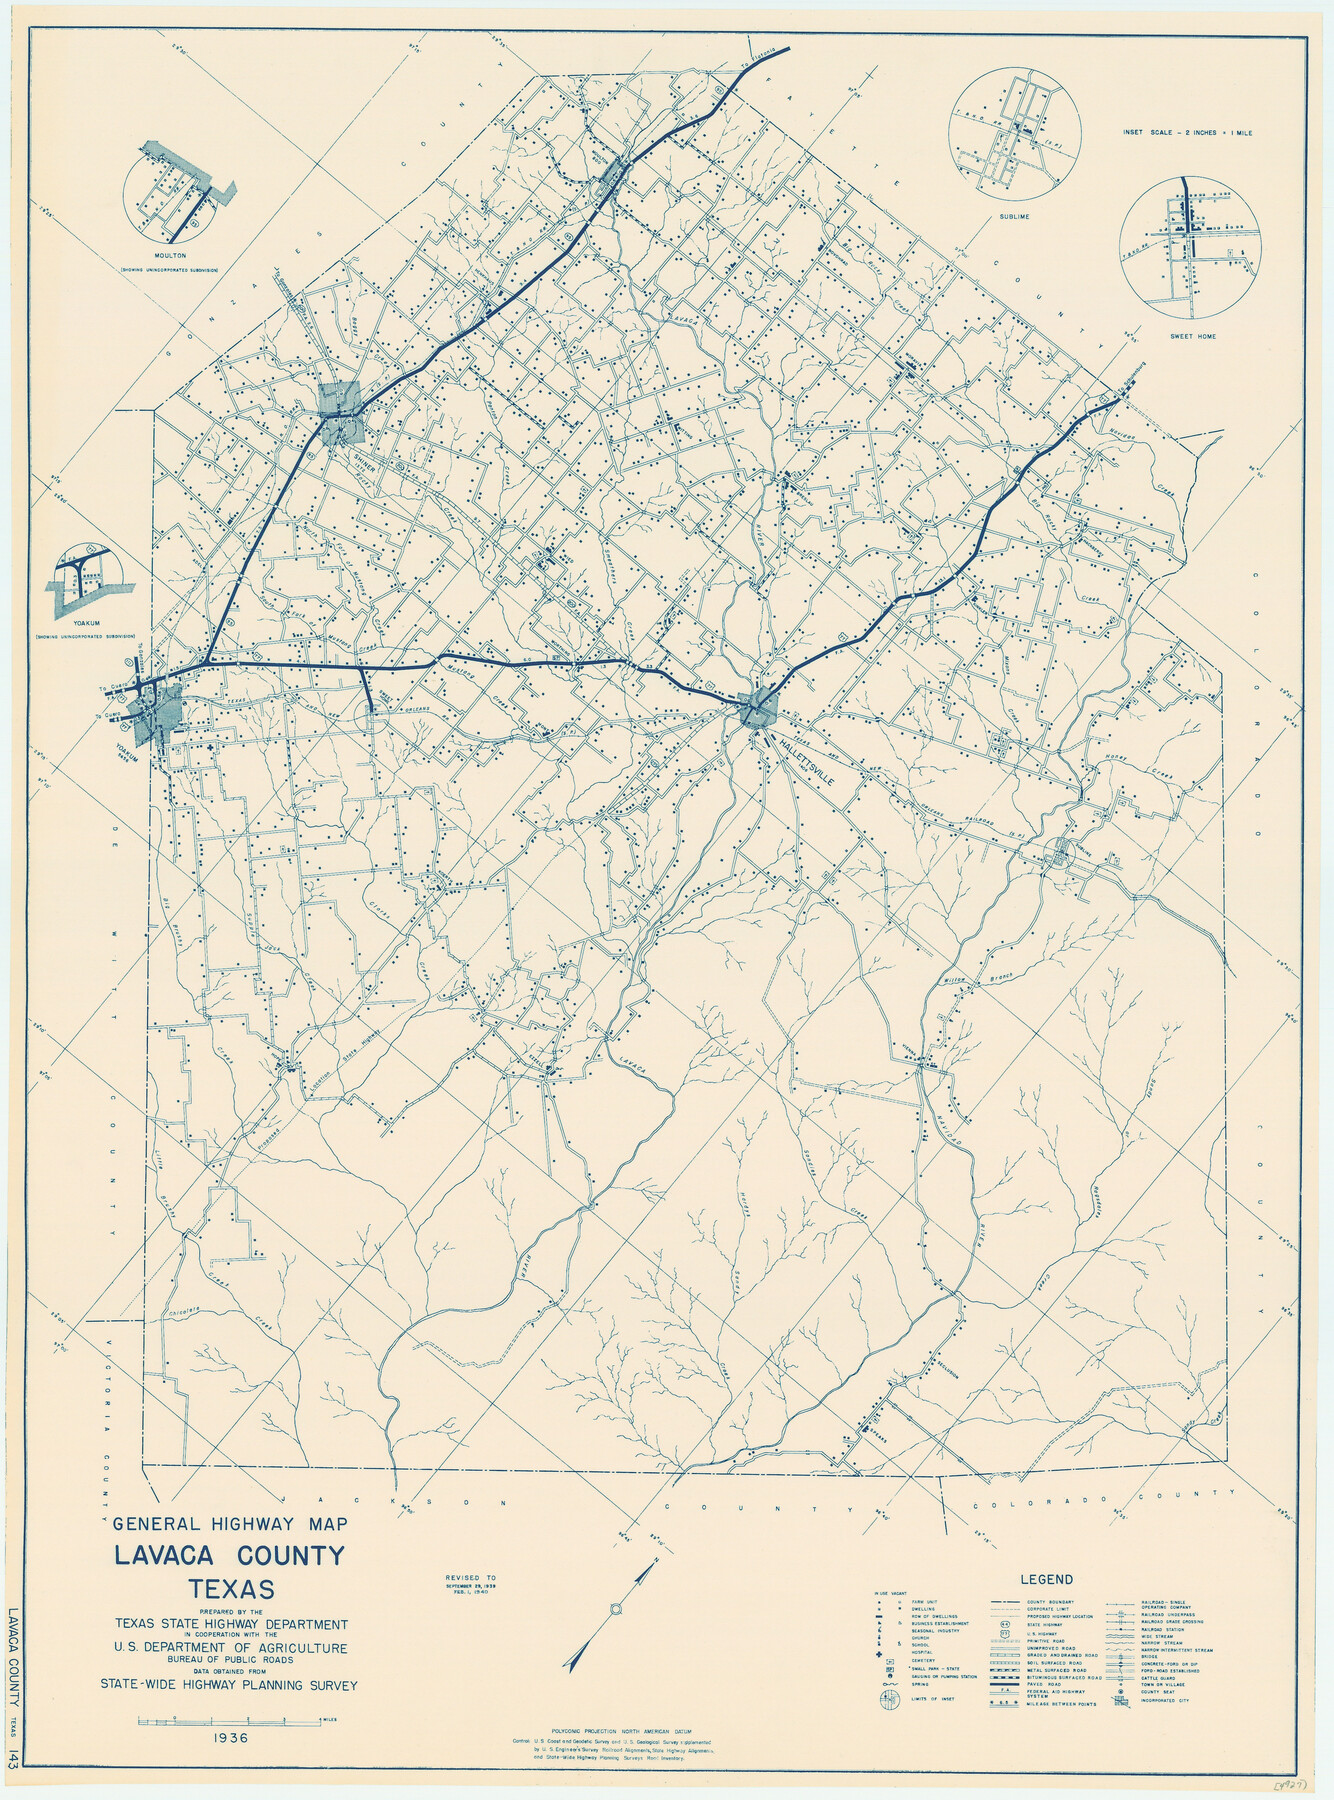 79170, General Highway Map, Lavaca County, Texas, Texas State Library and Archives